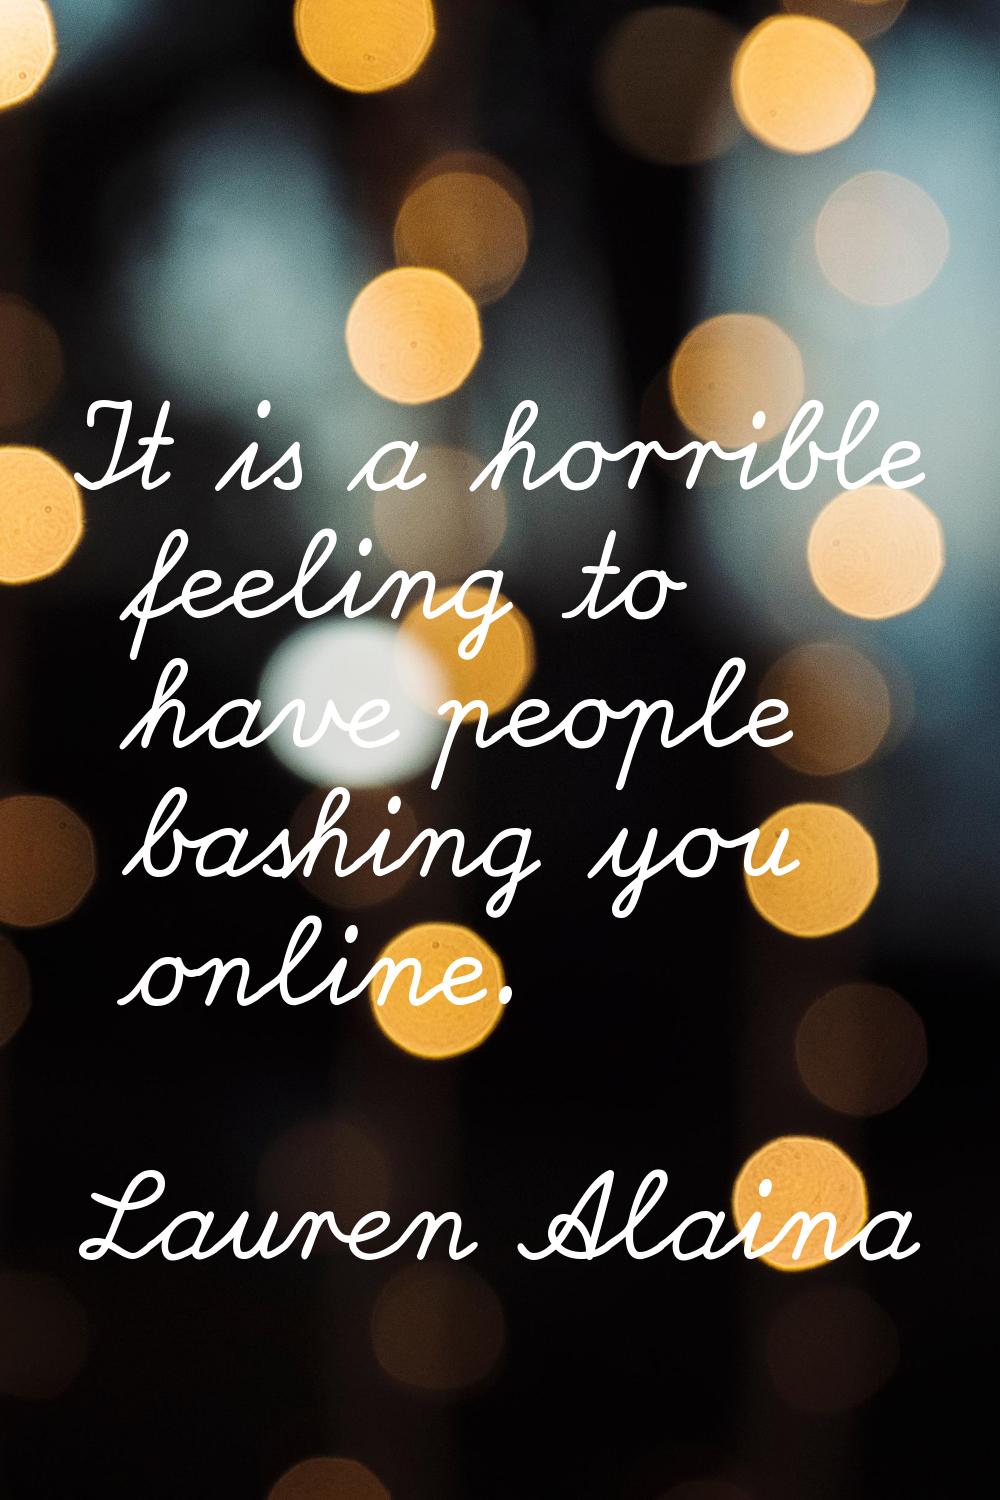 It is a horrible feeling to have people bashing you online.